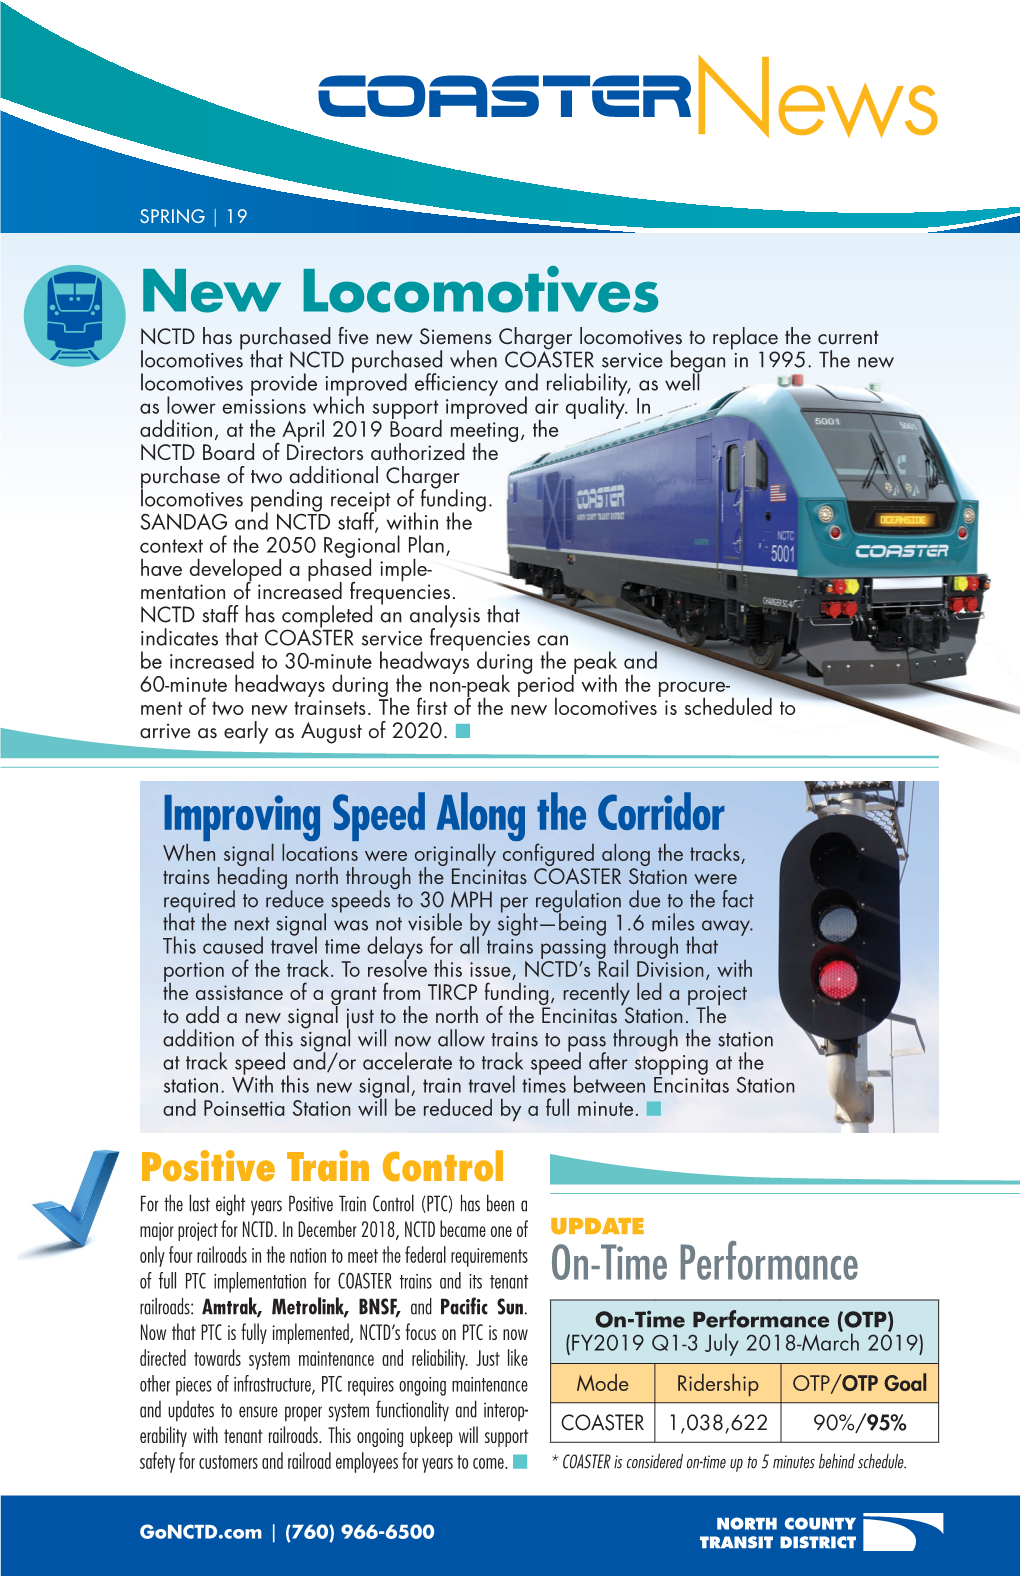 New Locomotives NCTD Has Purchased Five New Siemens Charger Locomotives to Replace the Current Locomotives That NCTD Purchased When COASTER Service Began in 1995